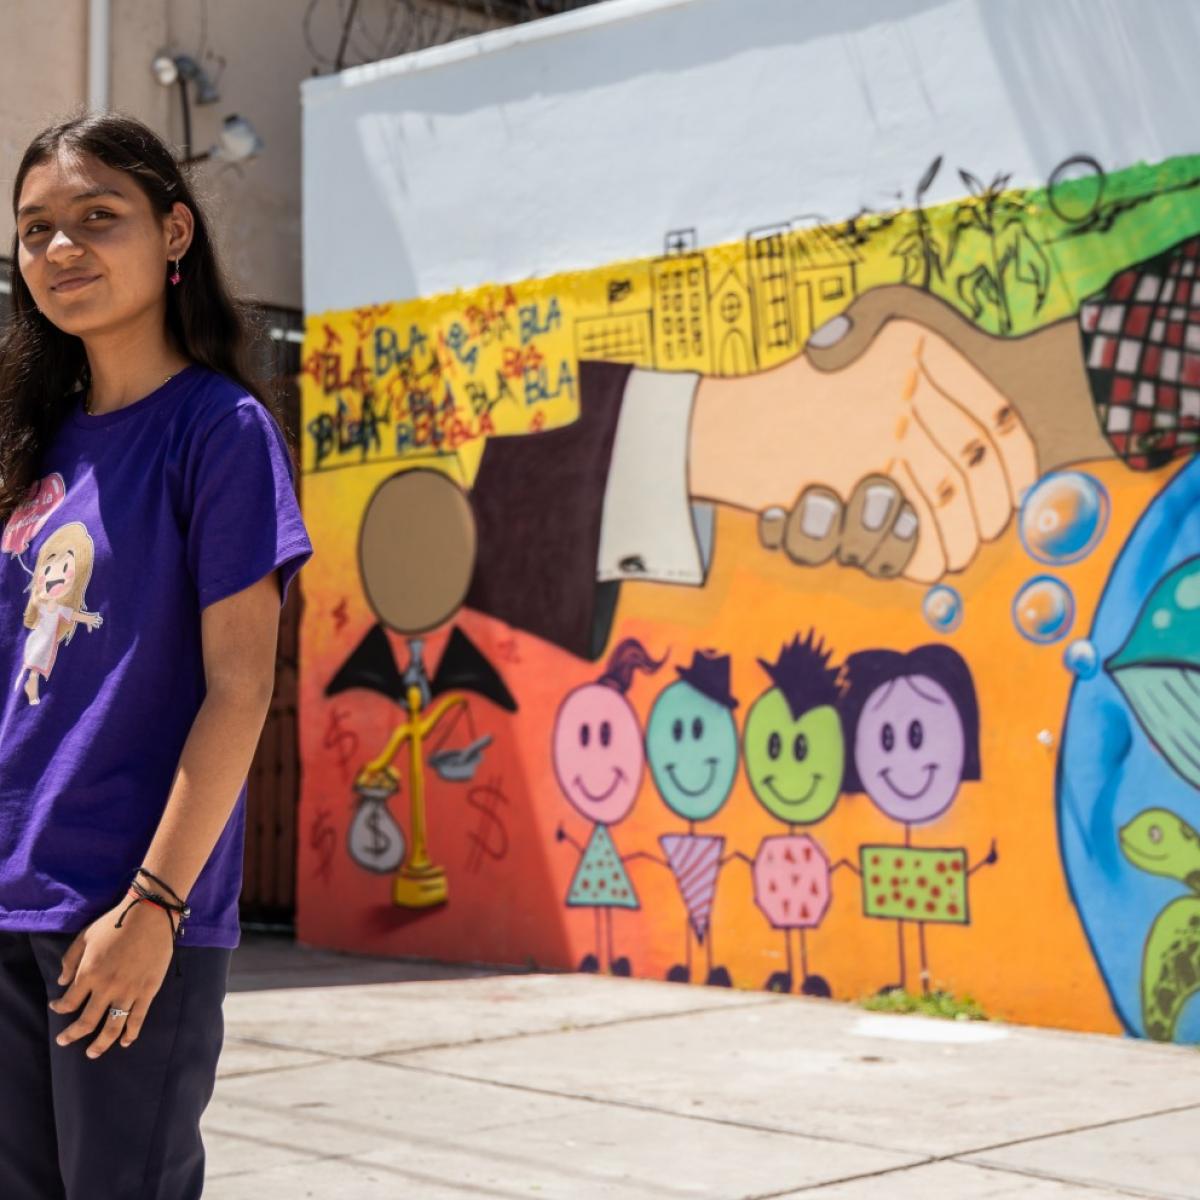 A girl in a purple shirt stands in front of a bright mural at her school.